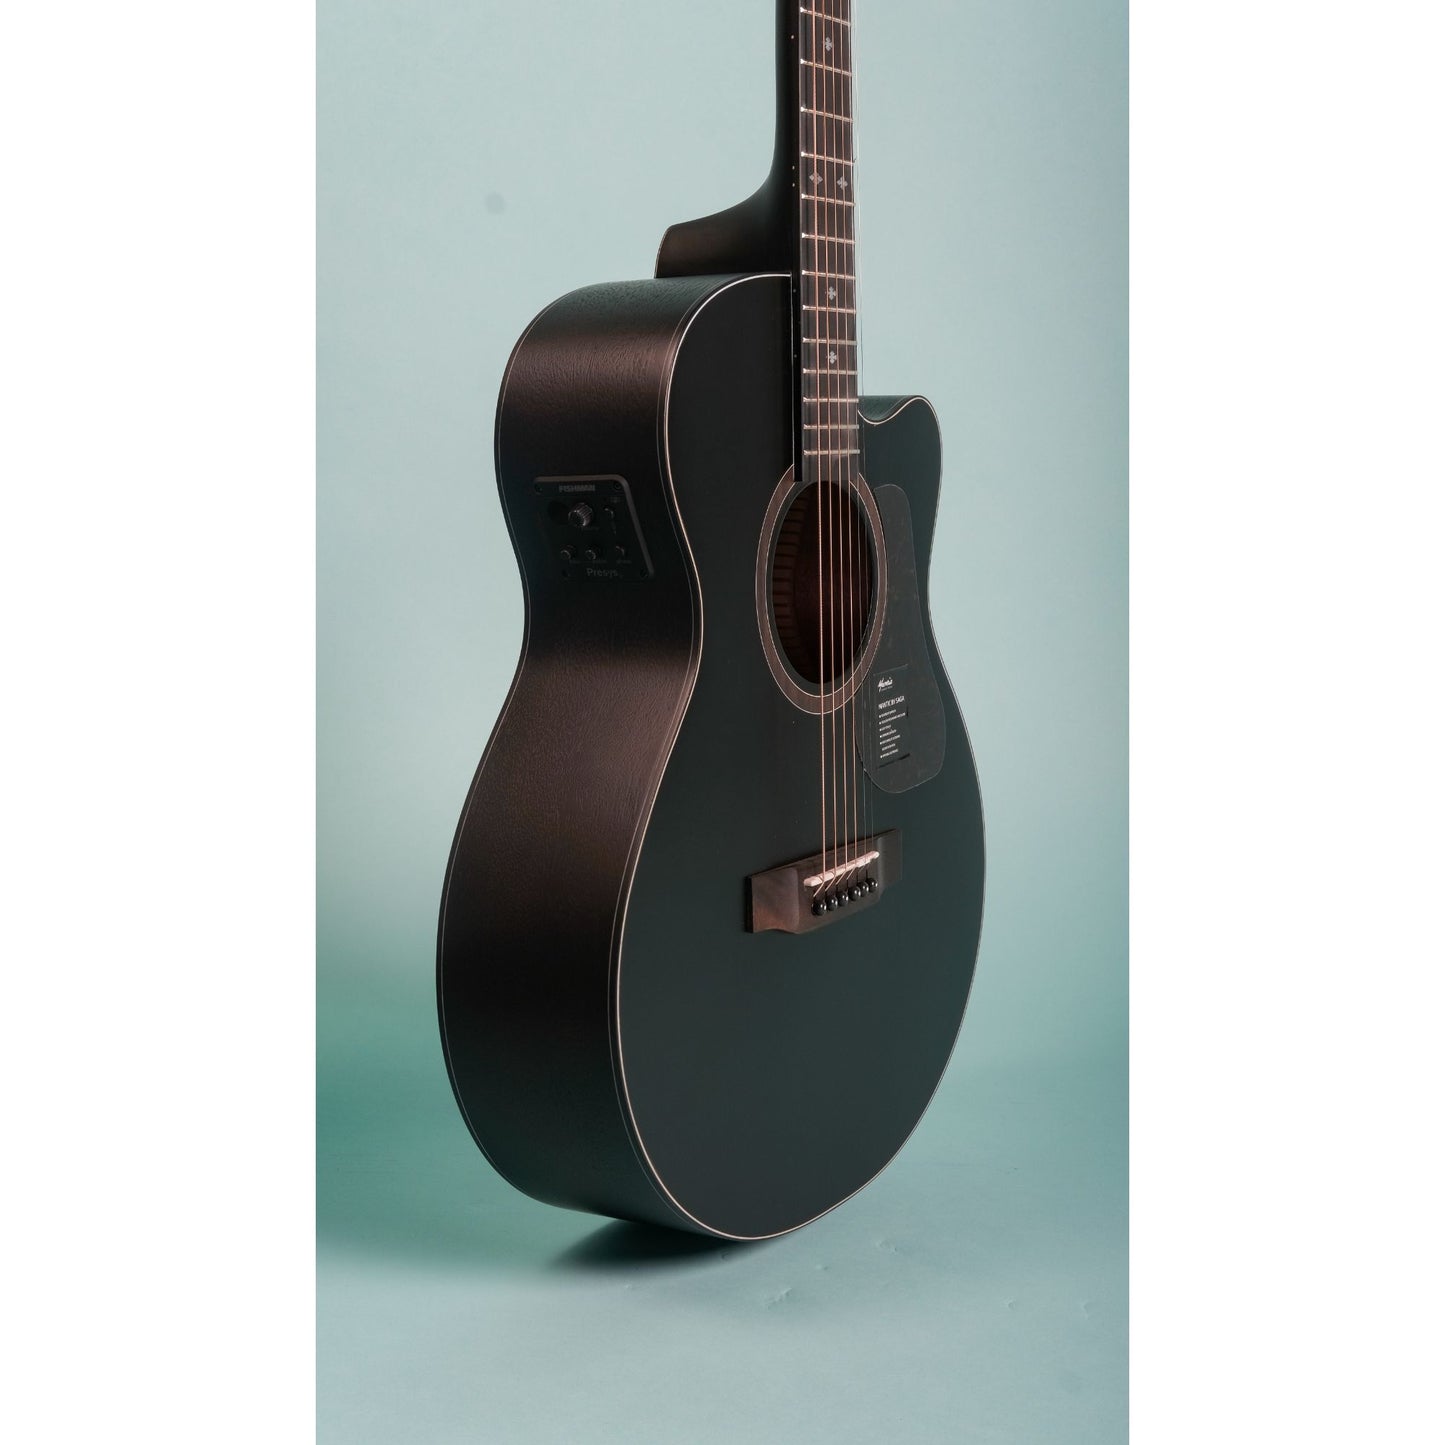 Mantic MG1CE Acoustic Guitar with Fishman Pickup - Black